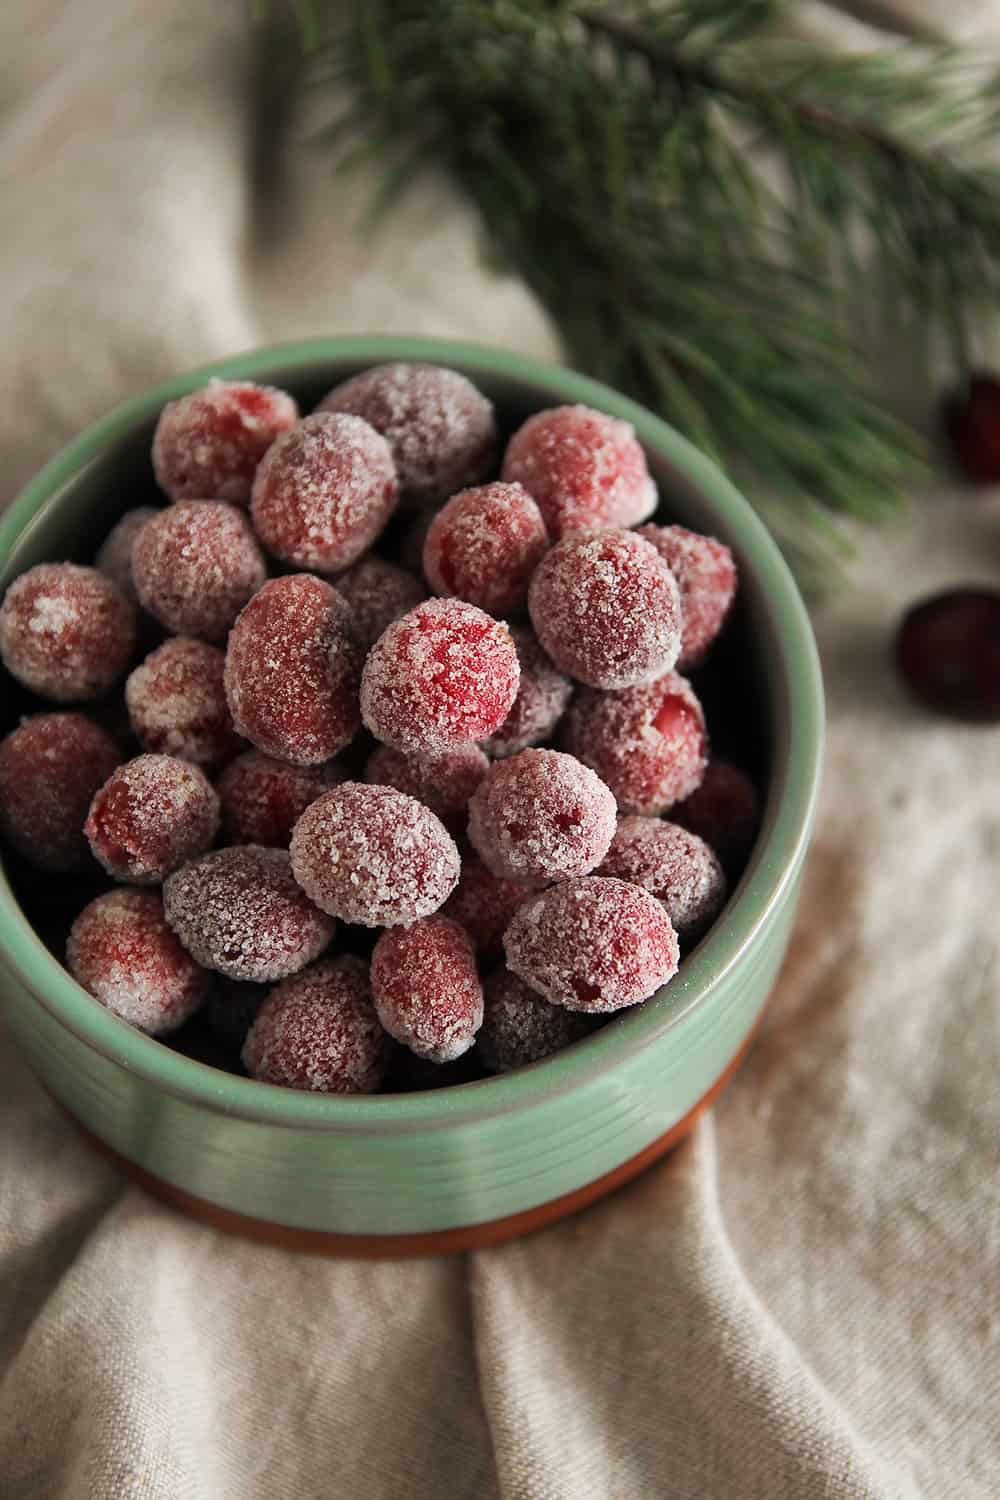 Sugared Cranberries are a fun, festive trick that can add a special touch to holiday treats. 